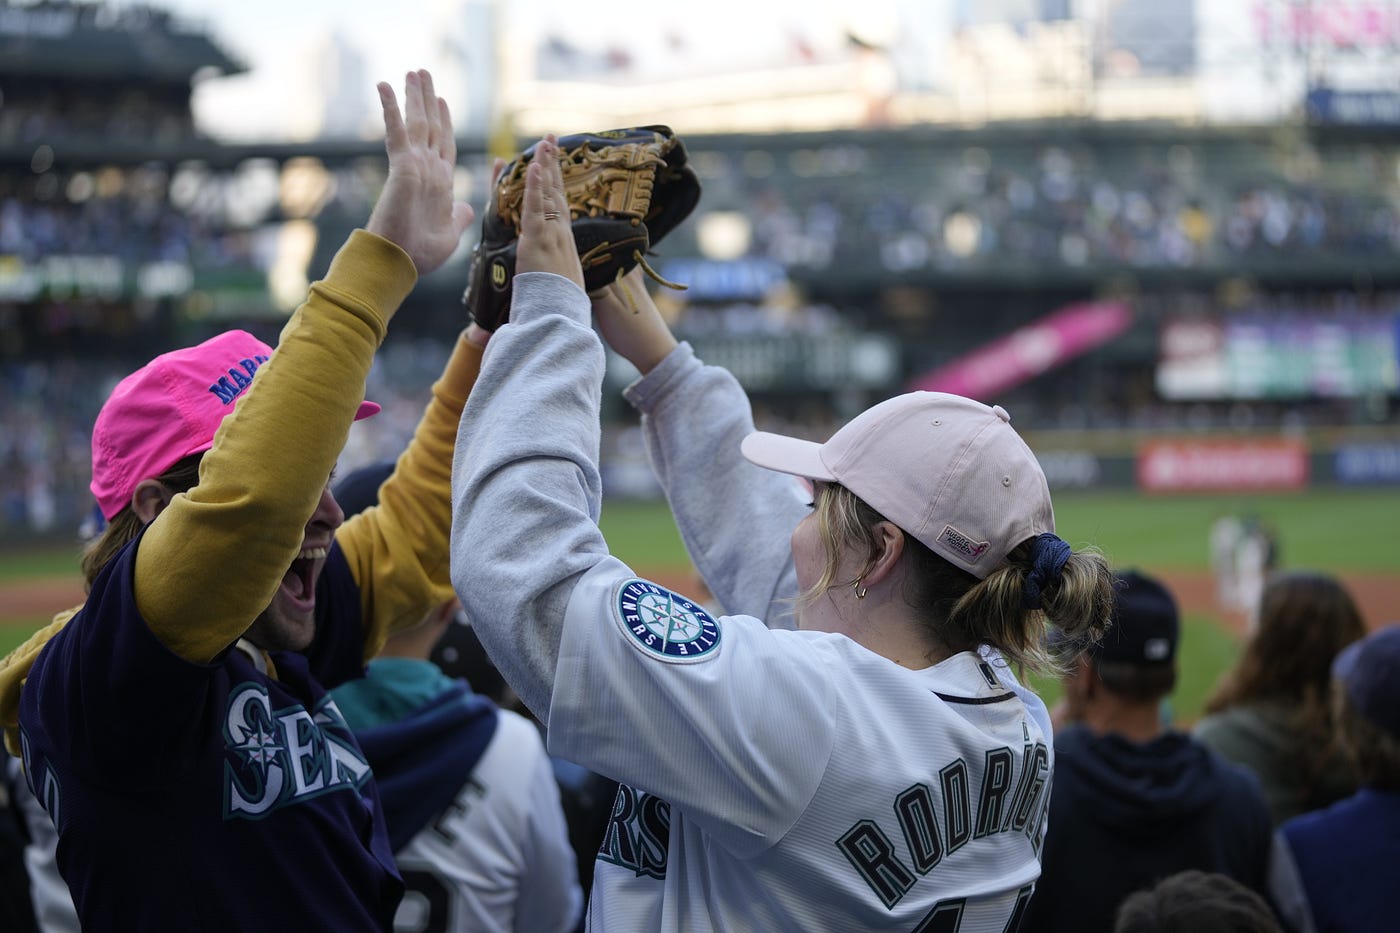 Mariners Announce New Value Options for 2023 Season